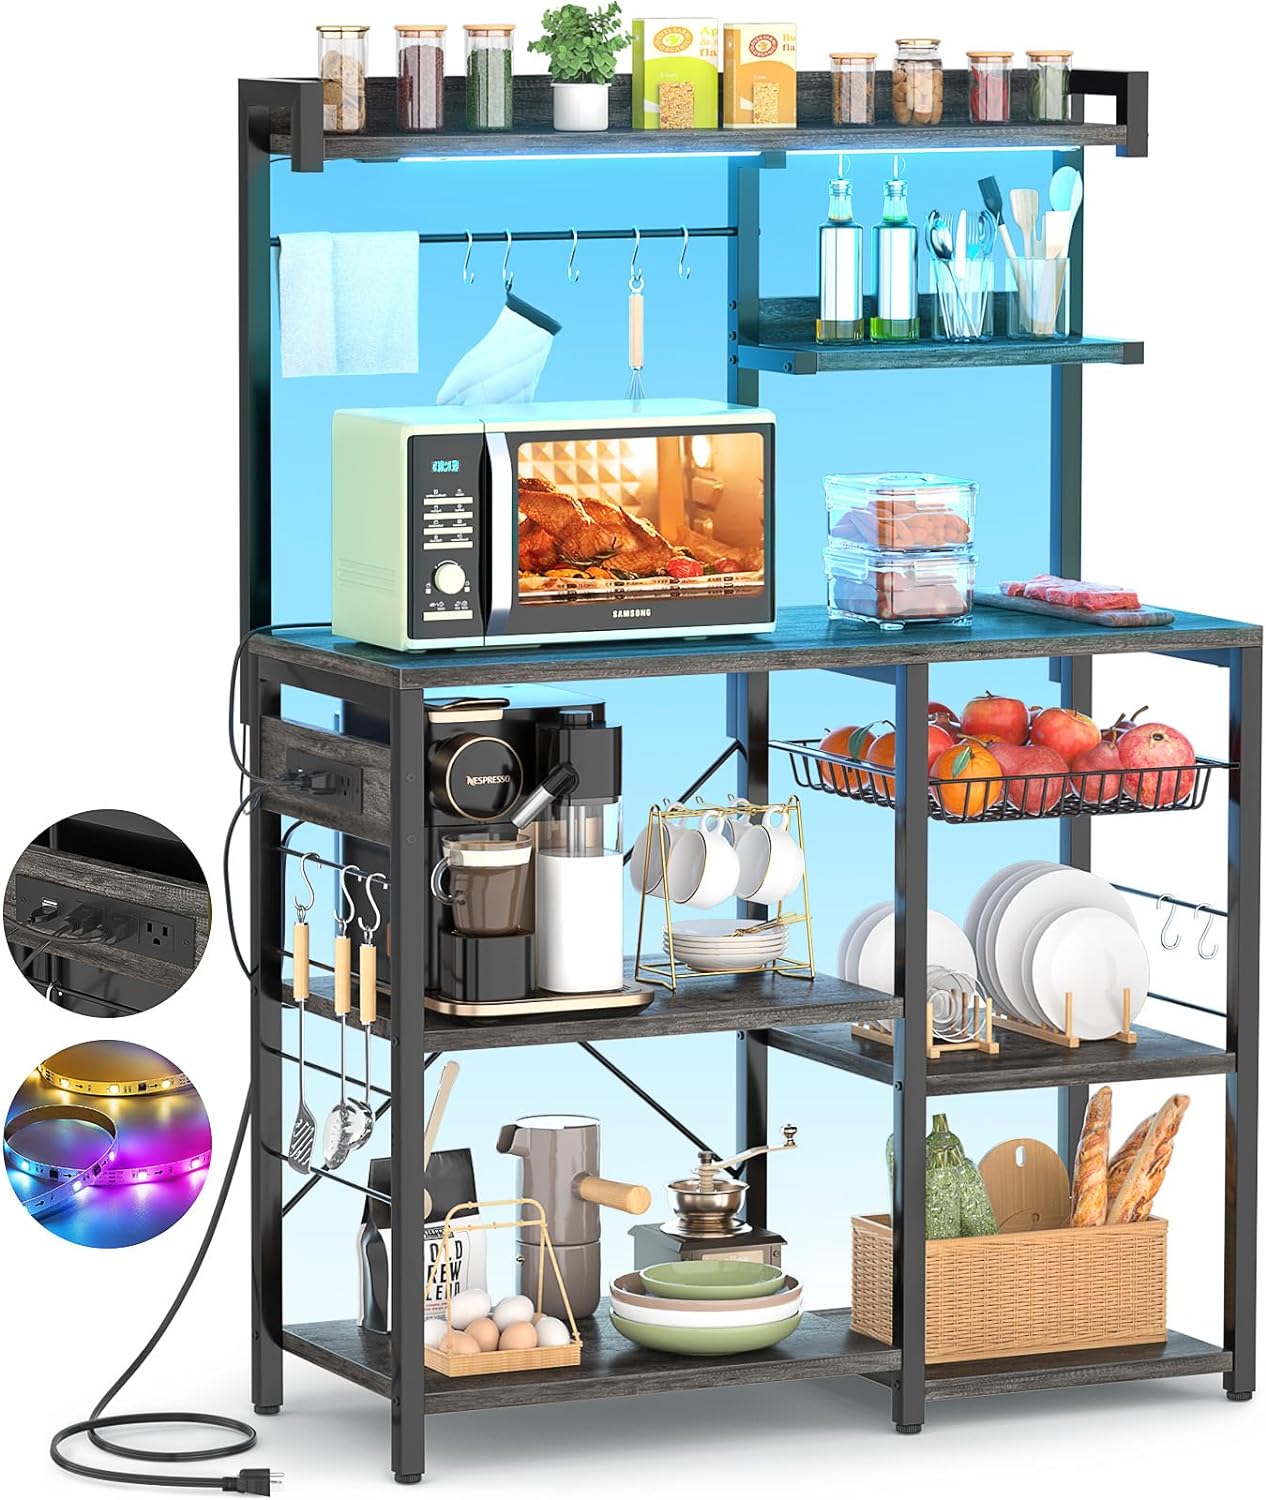 Aheaplus Bakers Rack with Power Outlet and LED Light Strings, Microwave Oven Stand Kitchen Storage Shelf with Wire Basket, Coffee Bar Station Island Table with 10 Hooks for Spices, Pots, Black Oak